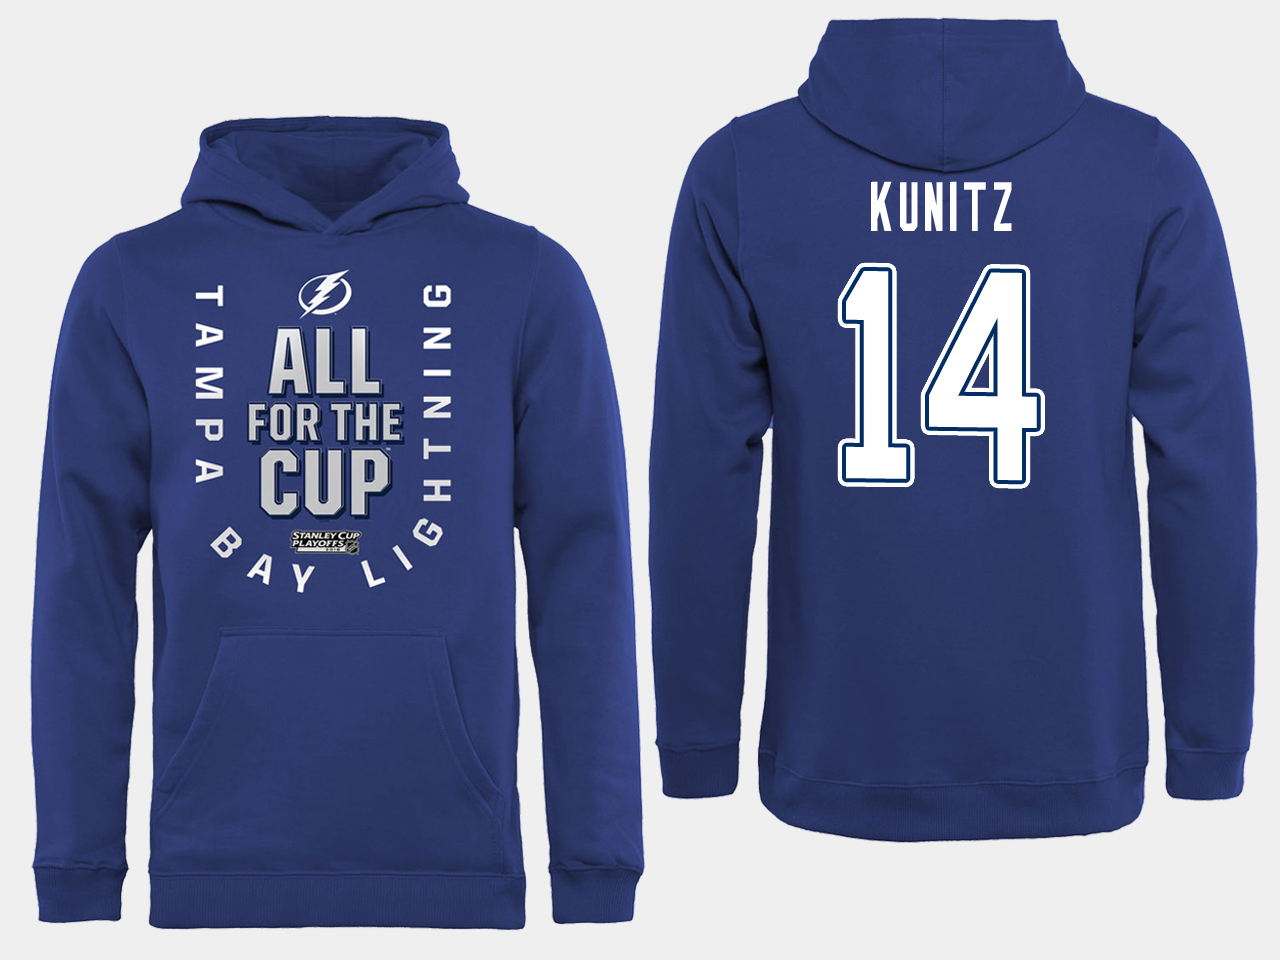 NHL Men adidas Tampa Bay Lightning #14 Kunitz blue All for the Cup Hoodie